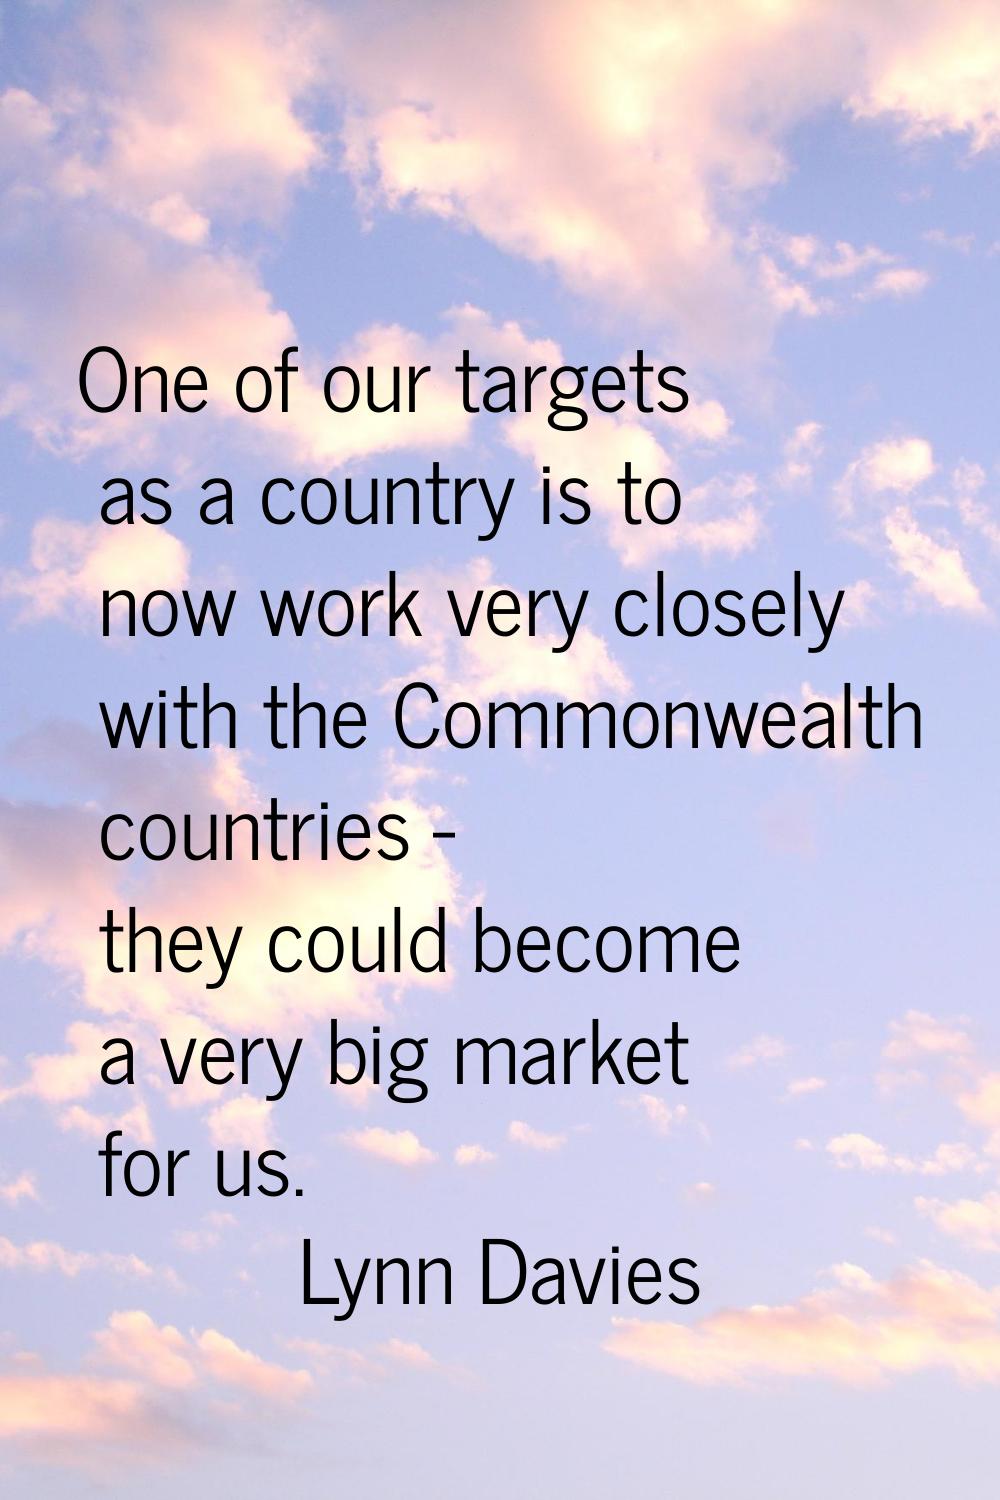 One of our targets as a country is to now work very closely with the Commonwealth countries - they 